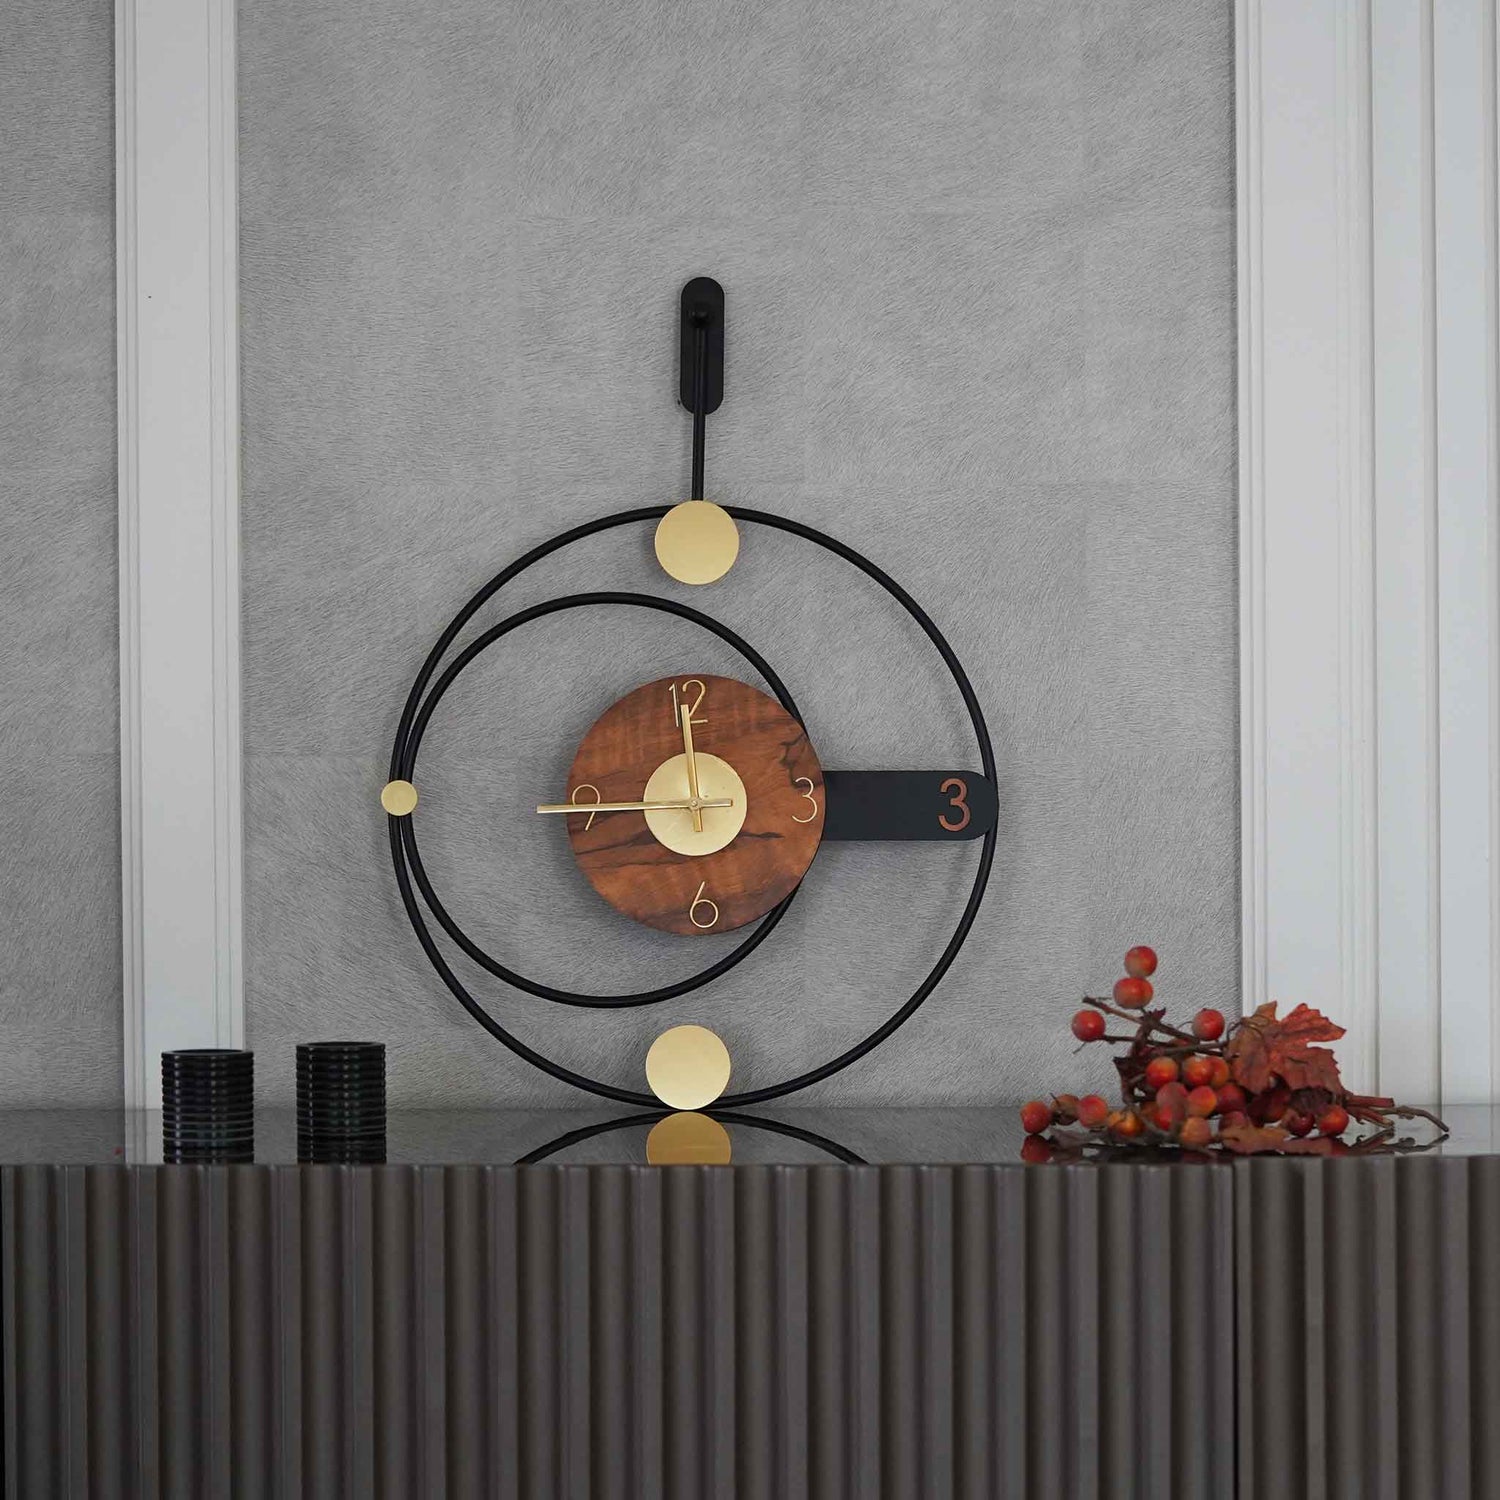 Modern design large metallic wall clock in rings shape design, placed on a console table.